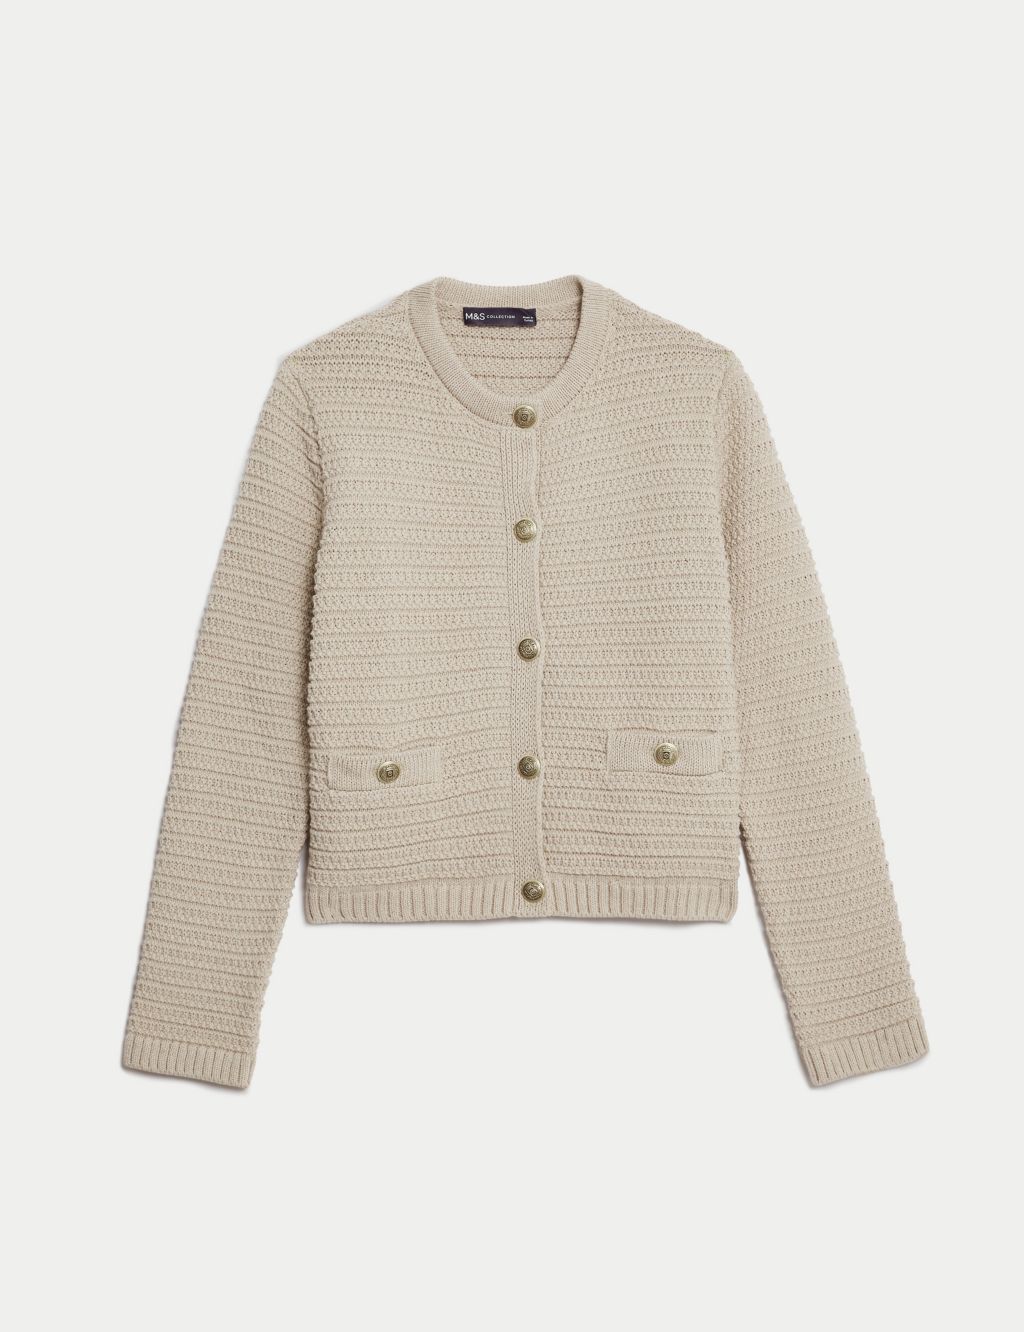 Cotton Blend Textured Knitted Jacket 1 of 8